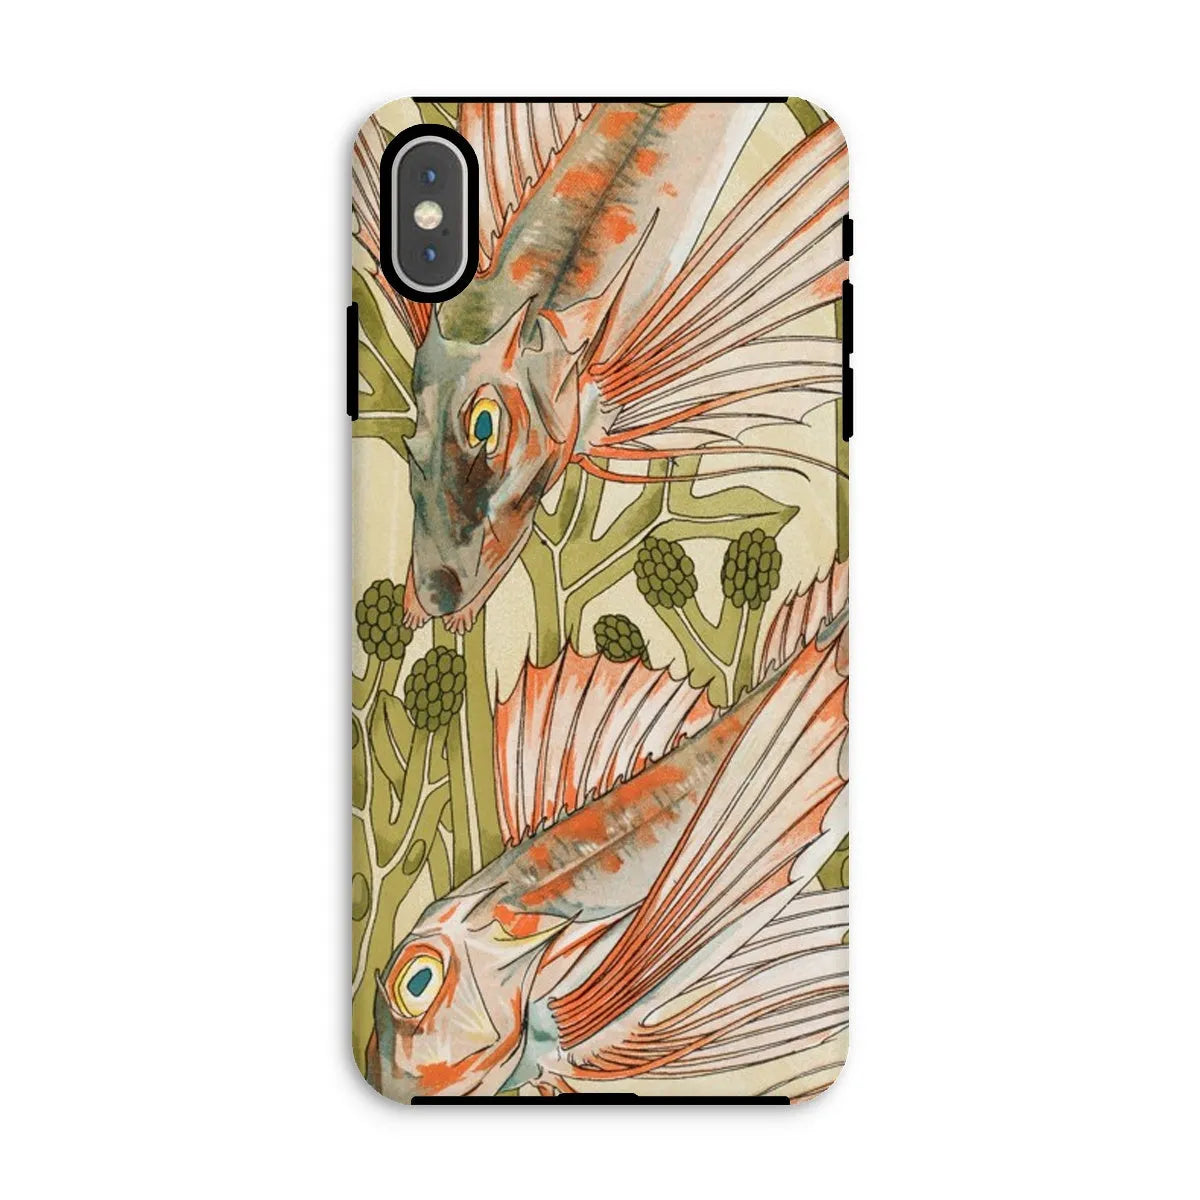 Red Fish - Animal Art Phone Case - Maurice Pillard Verneuil - Iphone Xs Max / Matte - Mobile Phone Cases - Aesthetic Art